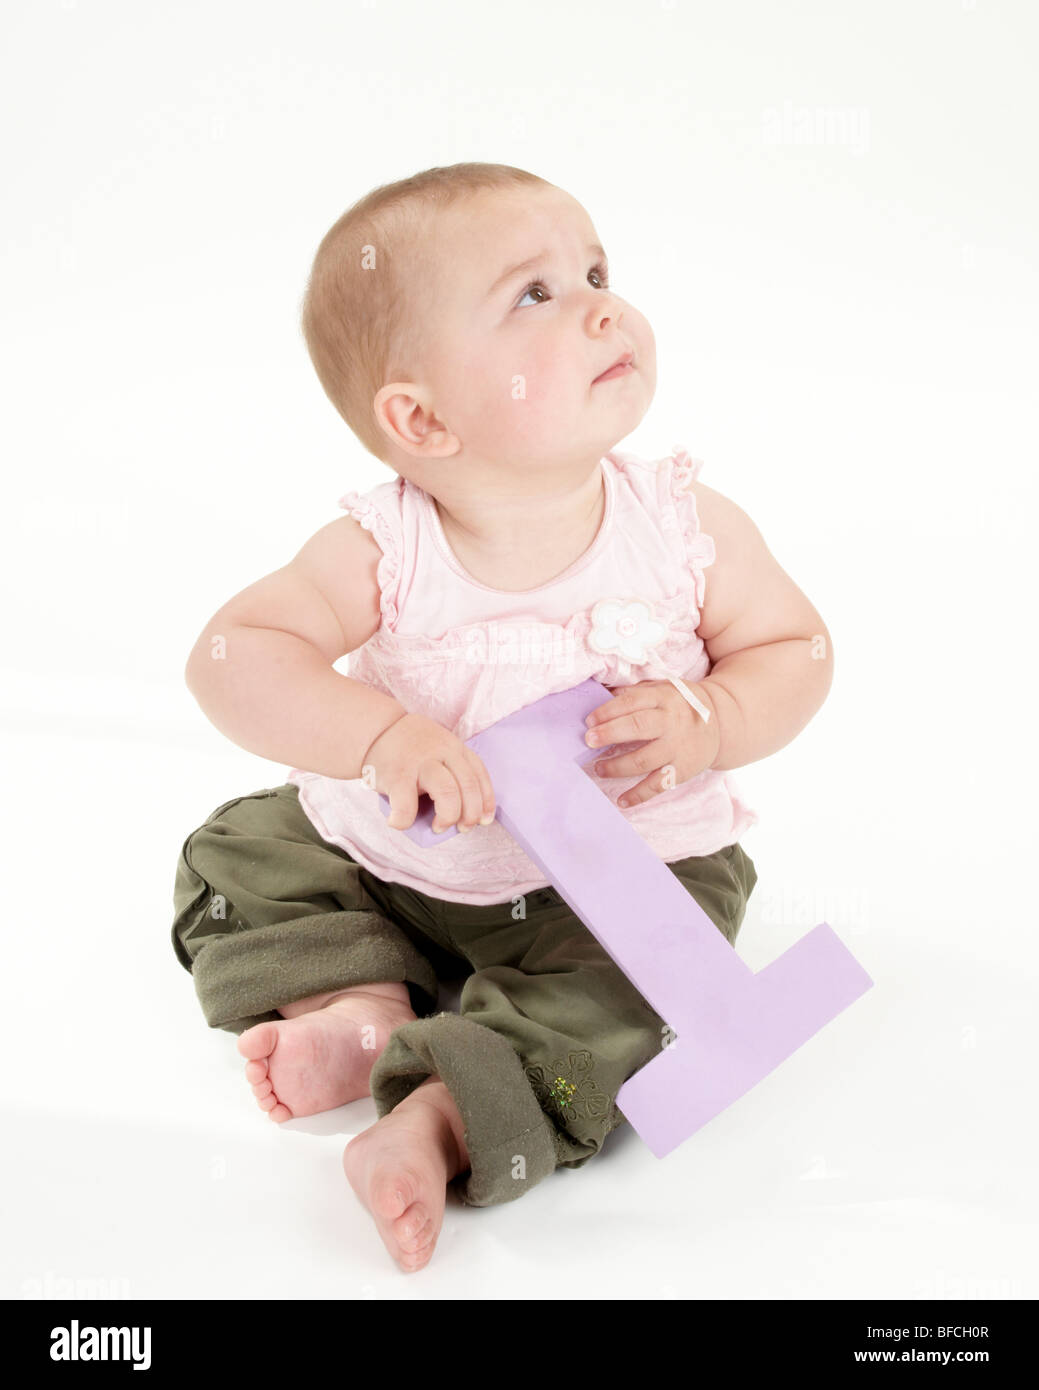 Baby Girl plays with Big Letter in Pink Top and Green Trousers Stock Photo